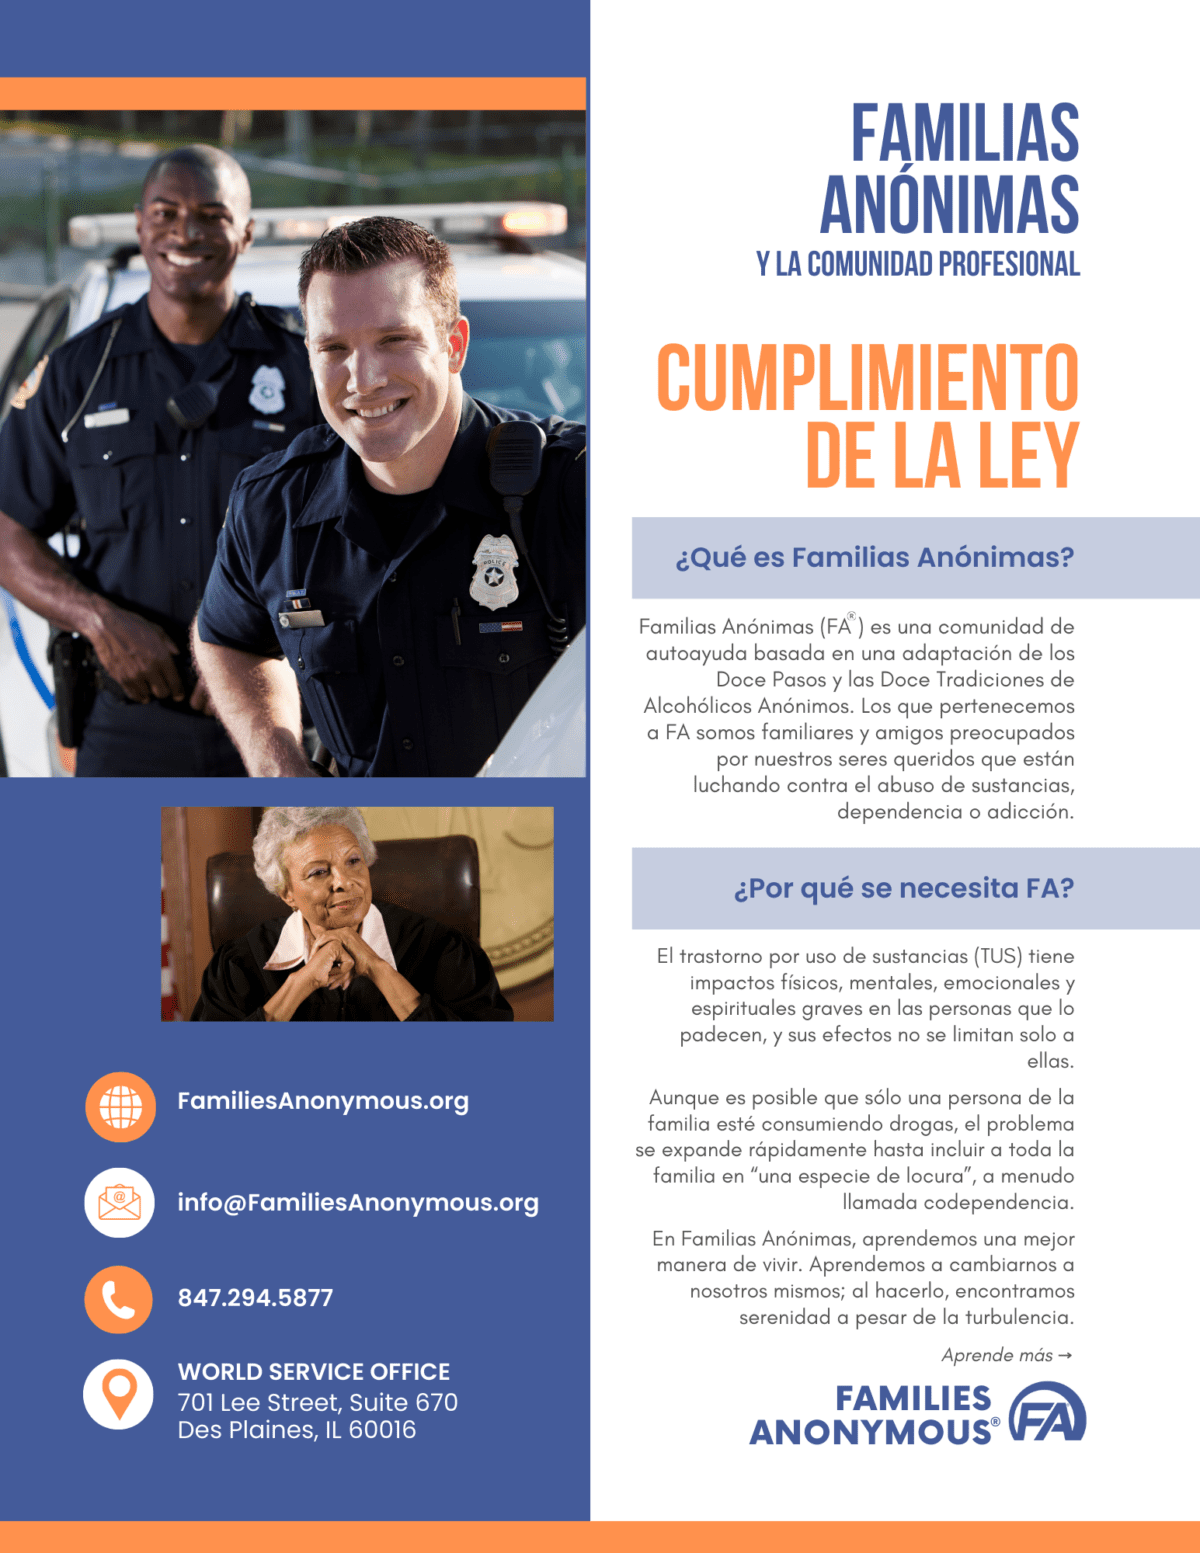 Families Anonymous and the Professional Community – Law Enforcement – SPANISH